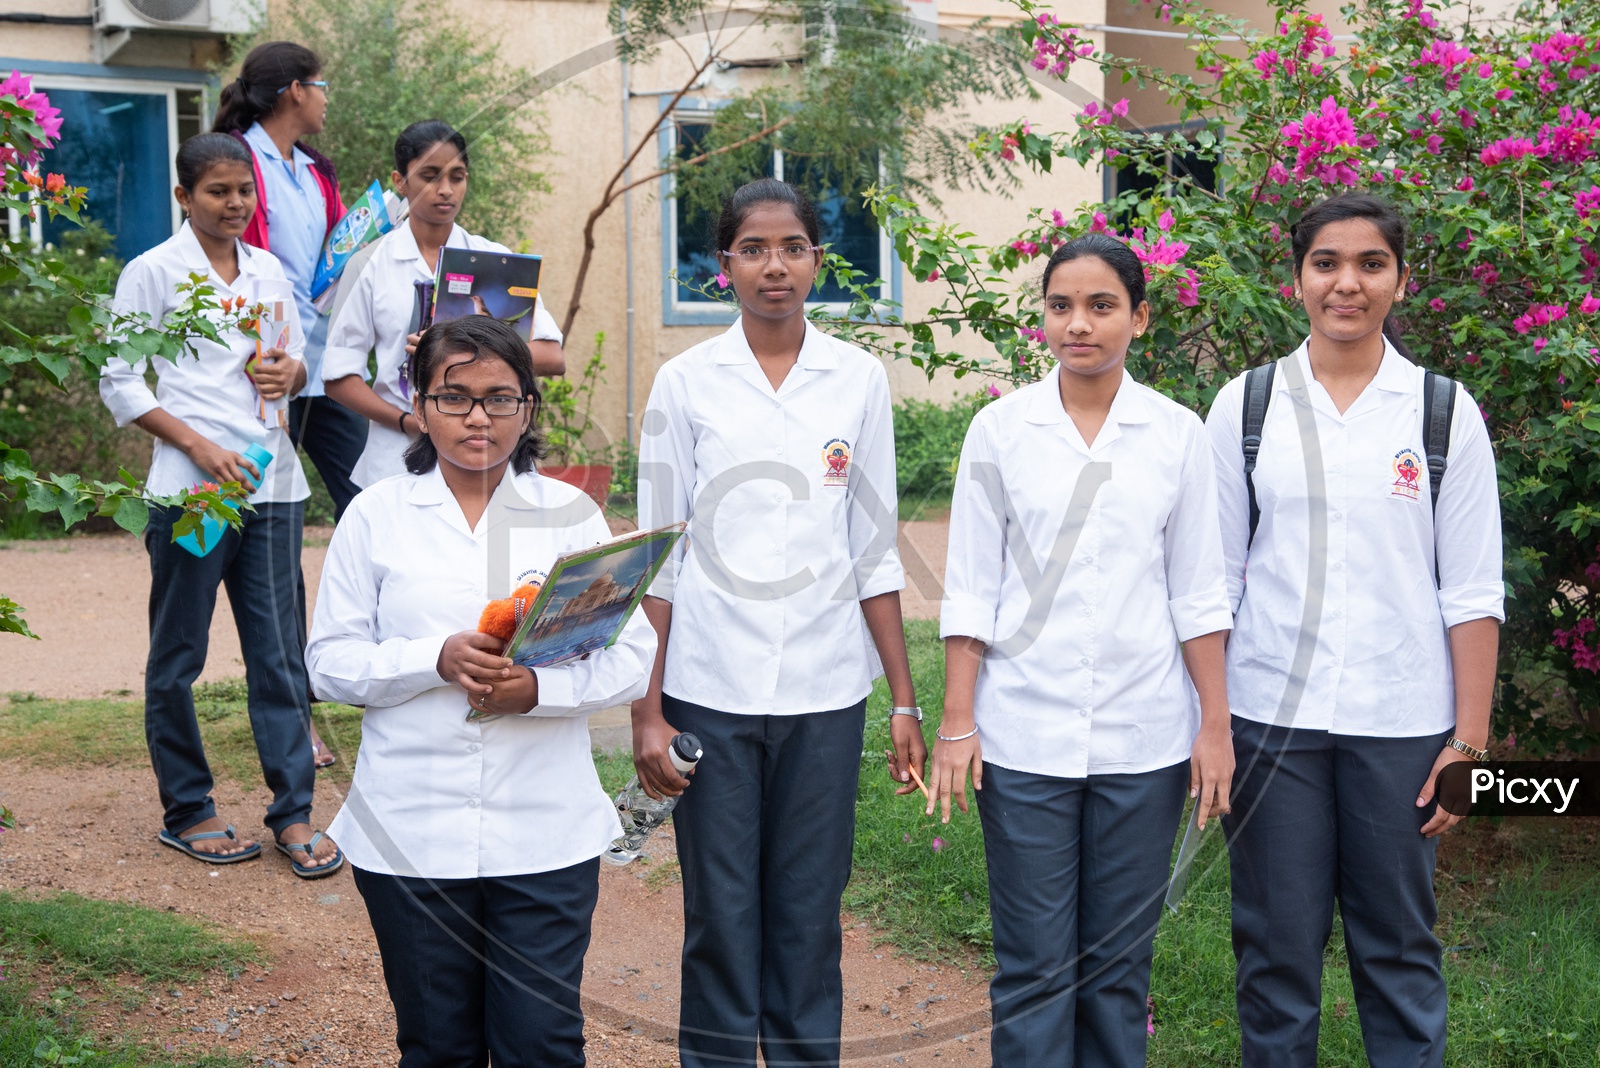 Students at an Educational Institute in Hyderabad